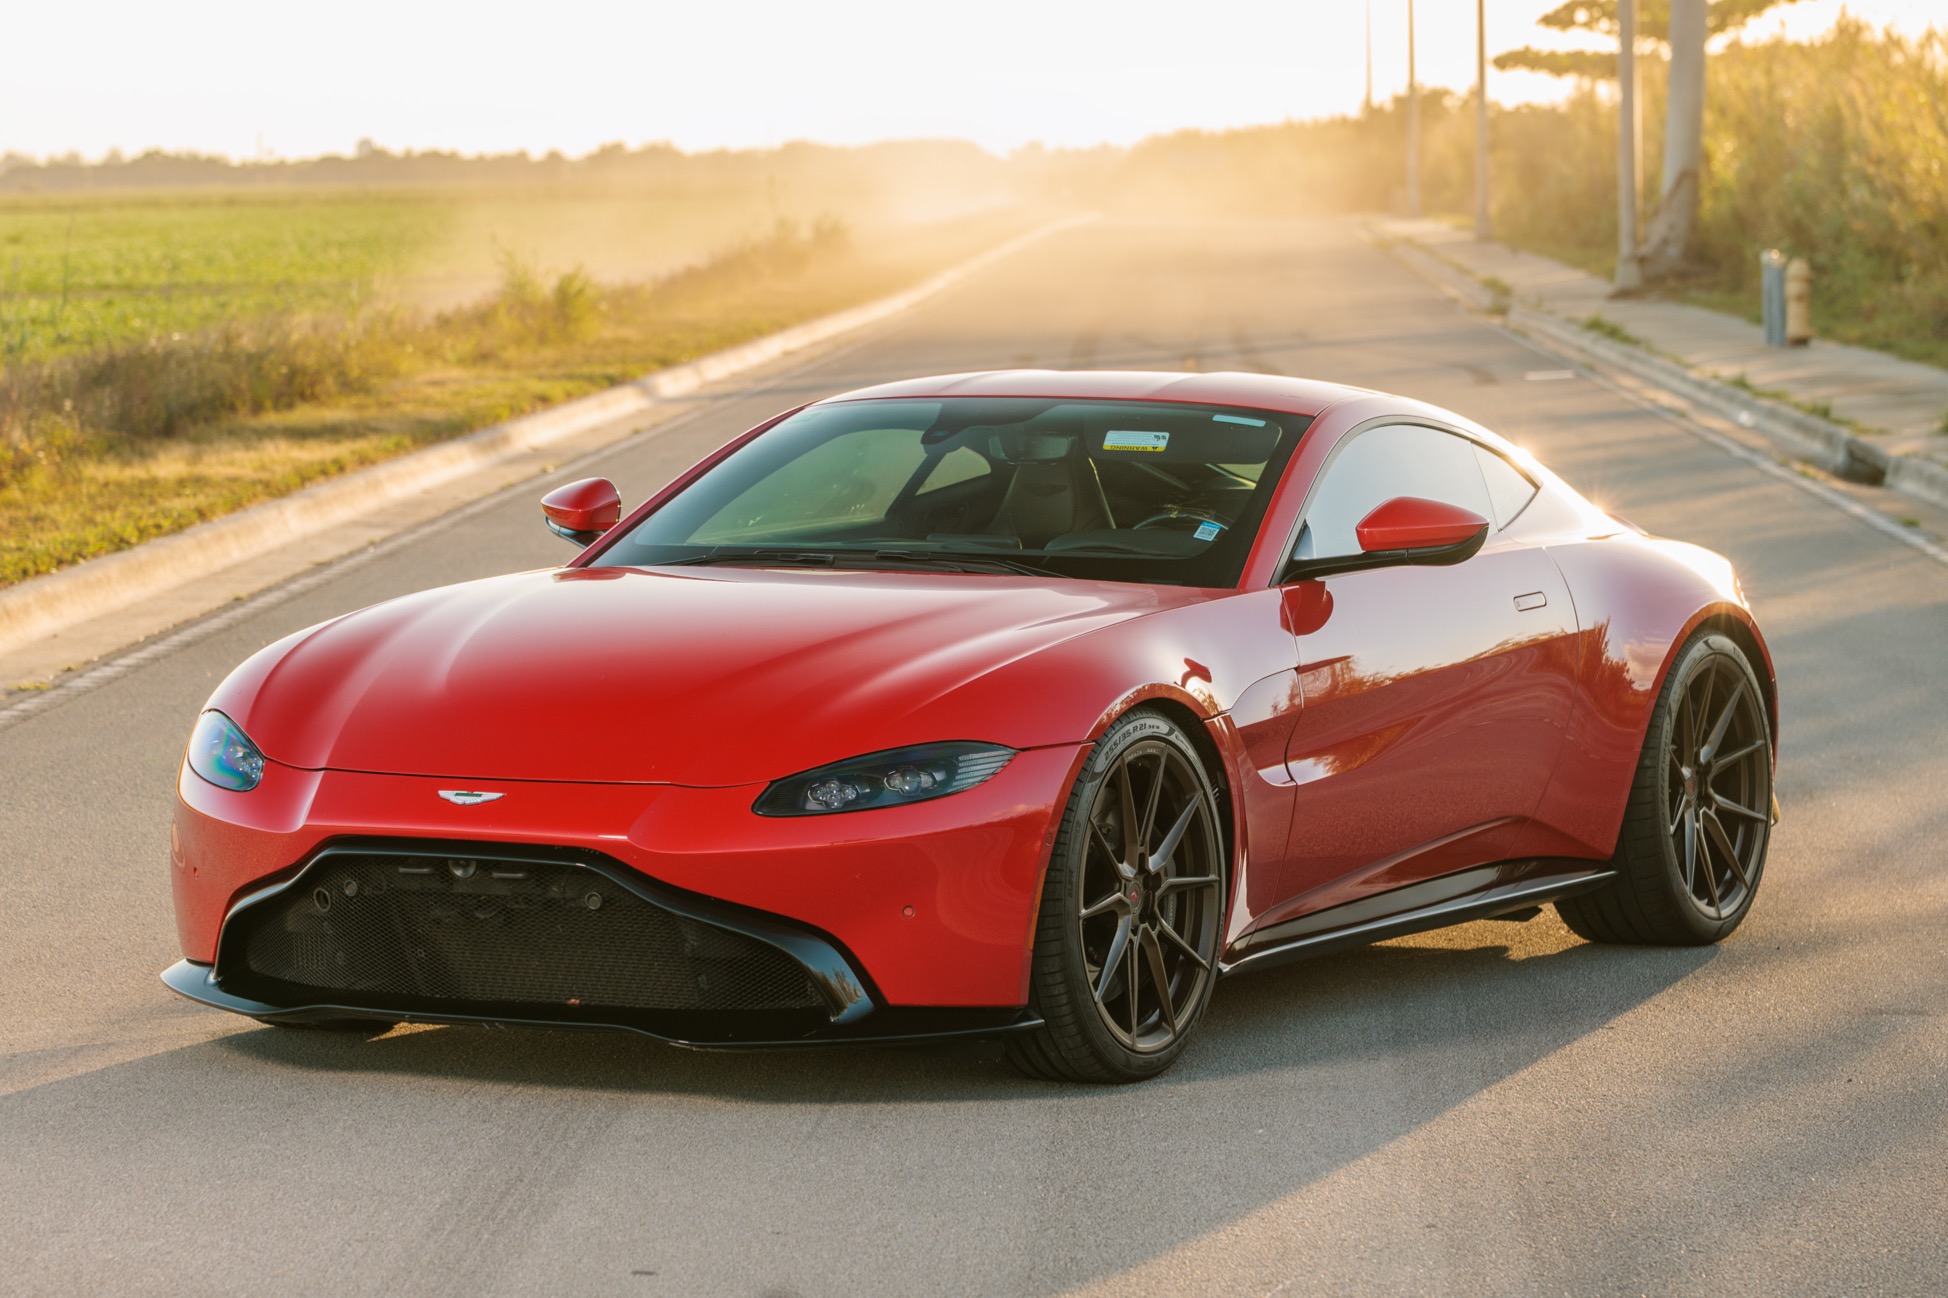 Used 2019 Aston Martin Vantage Coupe Review